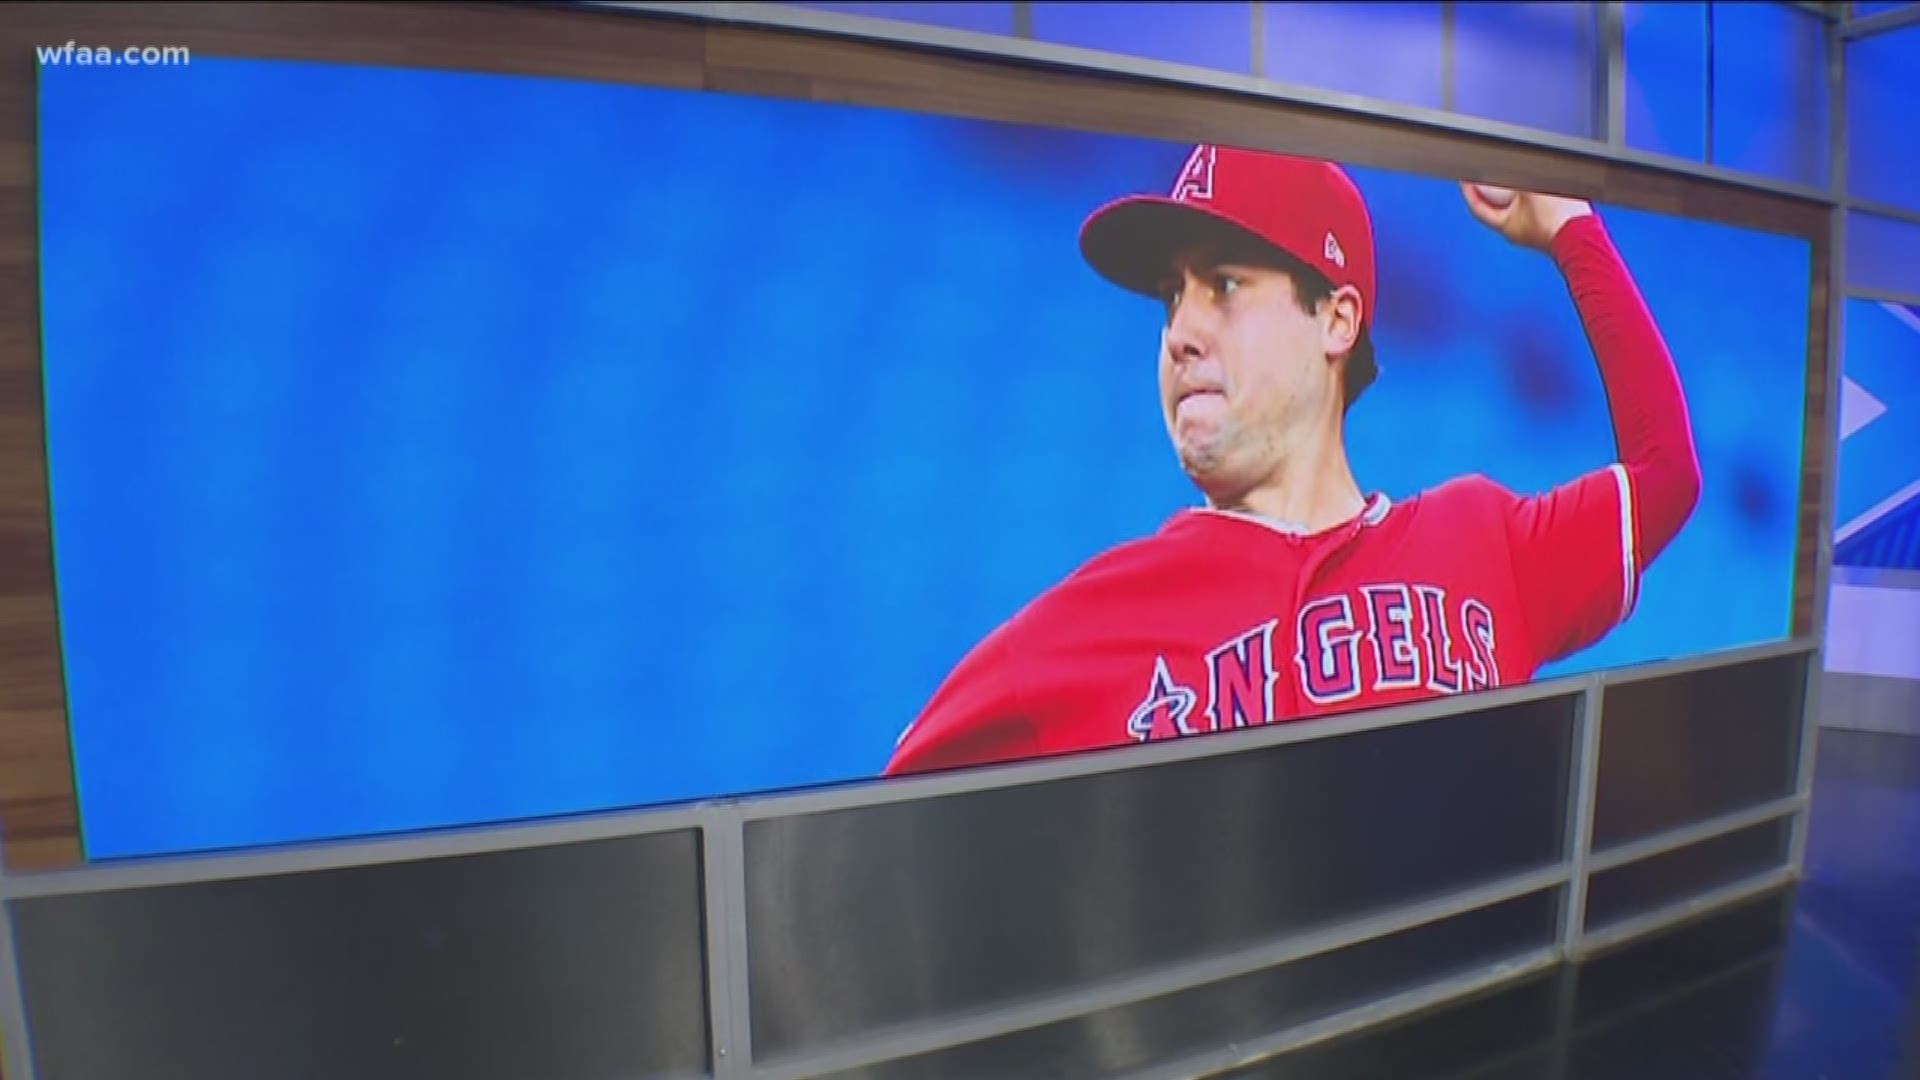 Report: DEA Investigating Where Angels Pitcher Tyler Skaggs Got Drugs That  Were In His System When He Died In Texas - CBS Texas